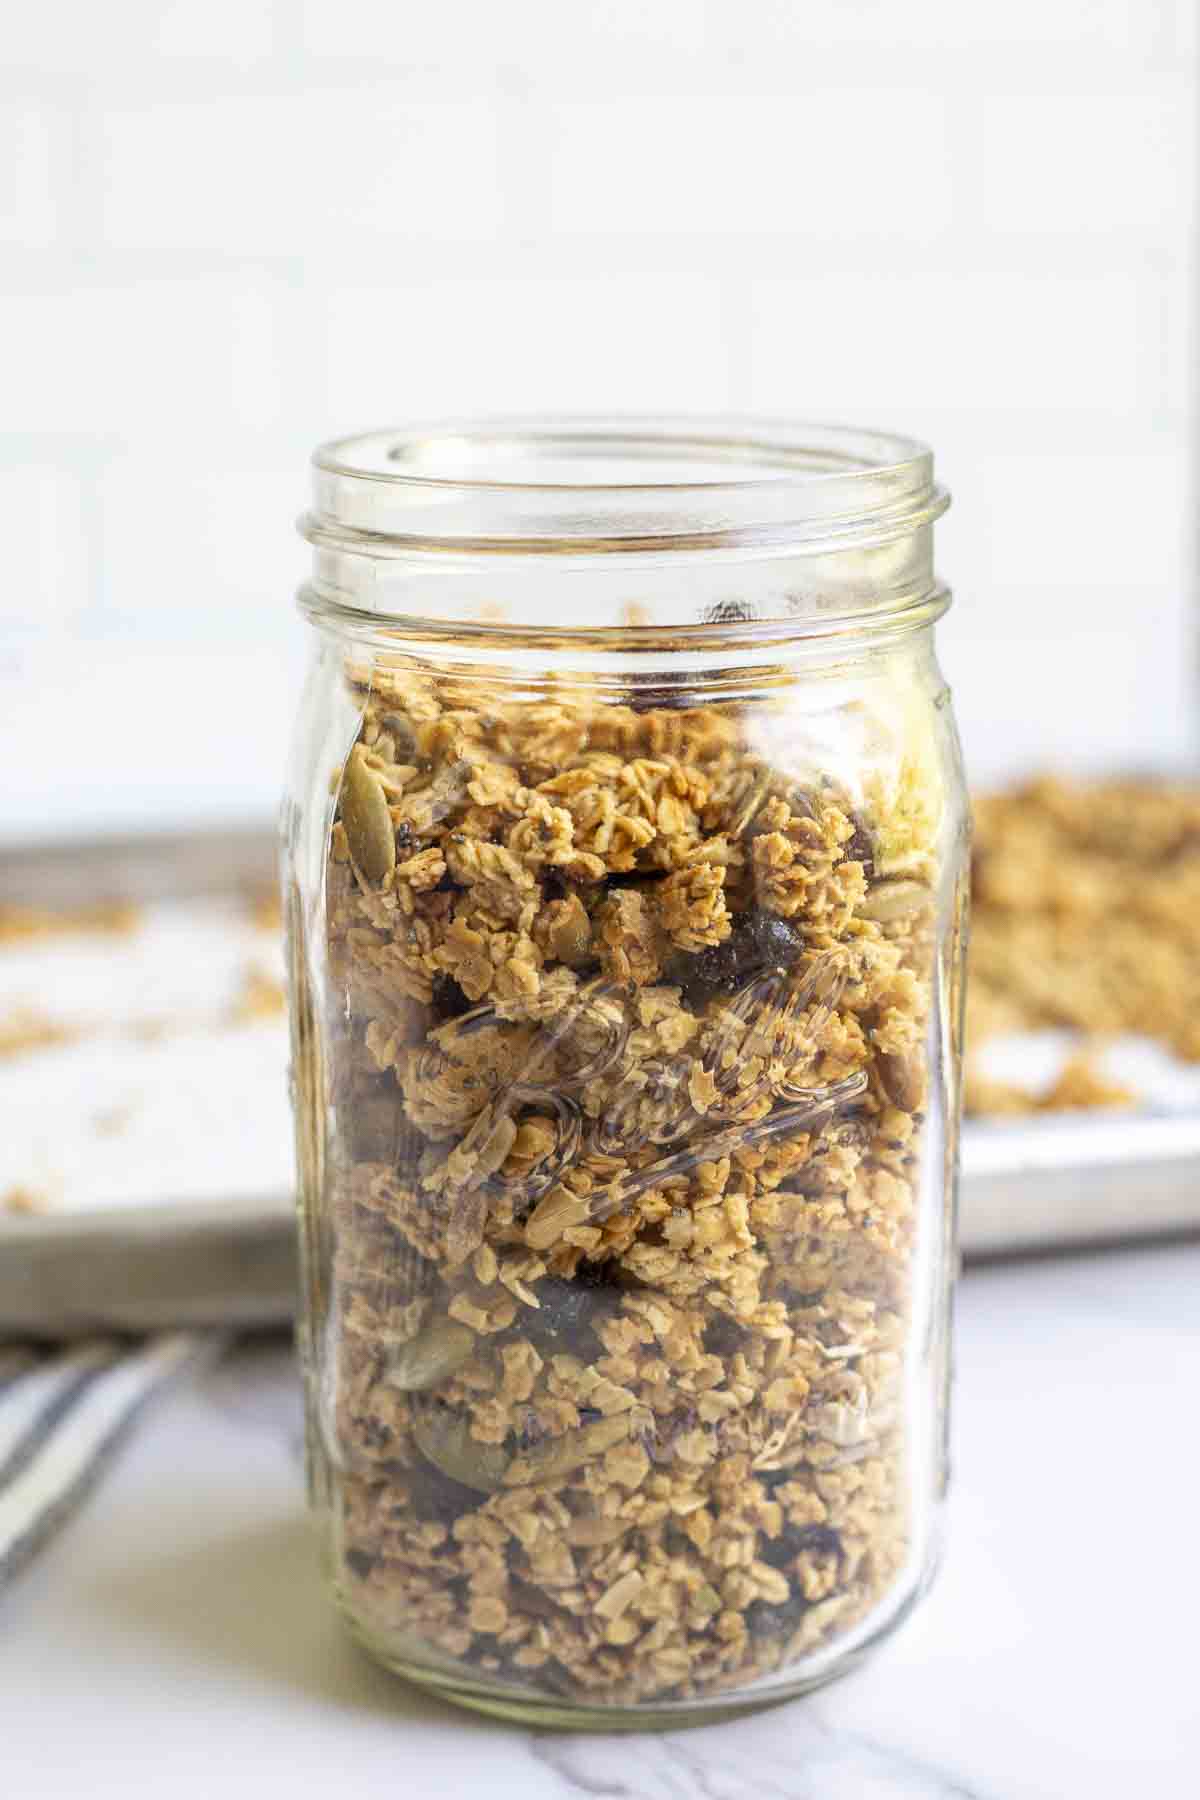 A mason jar of sourdough granola on a marble counter with a baking sheet of more granola in the background.